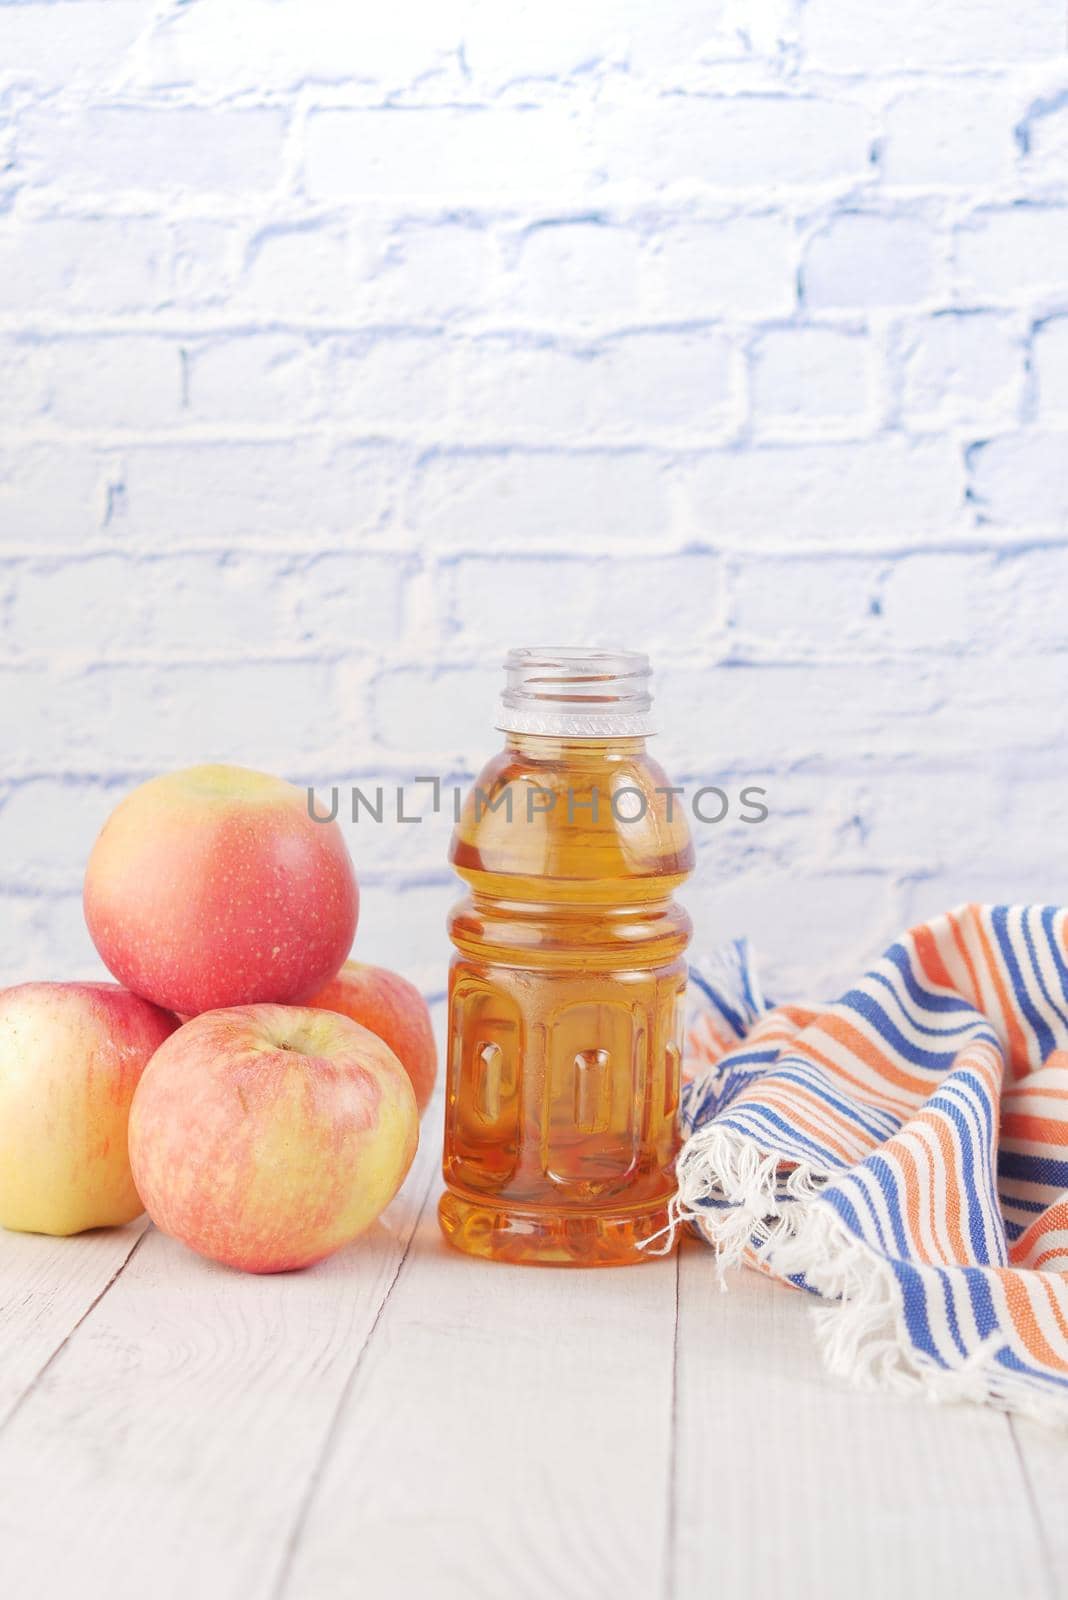 fresh apples and bottle of juice on table .